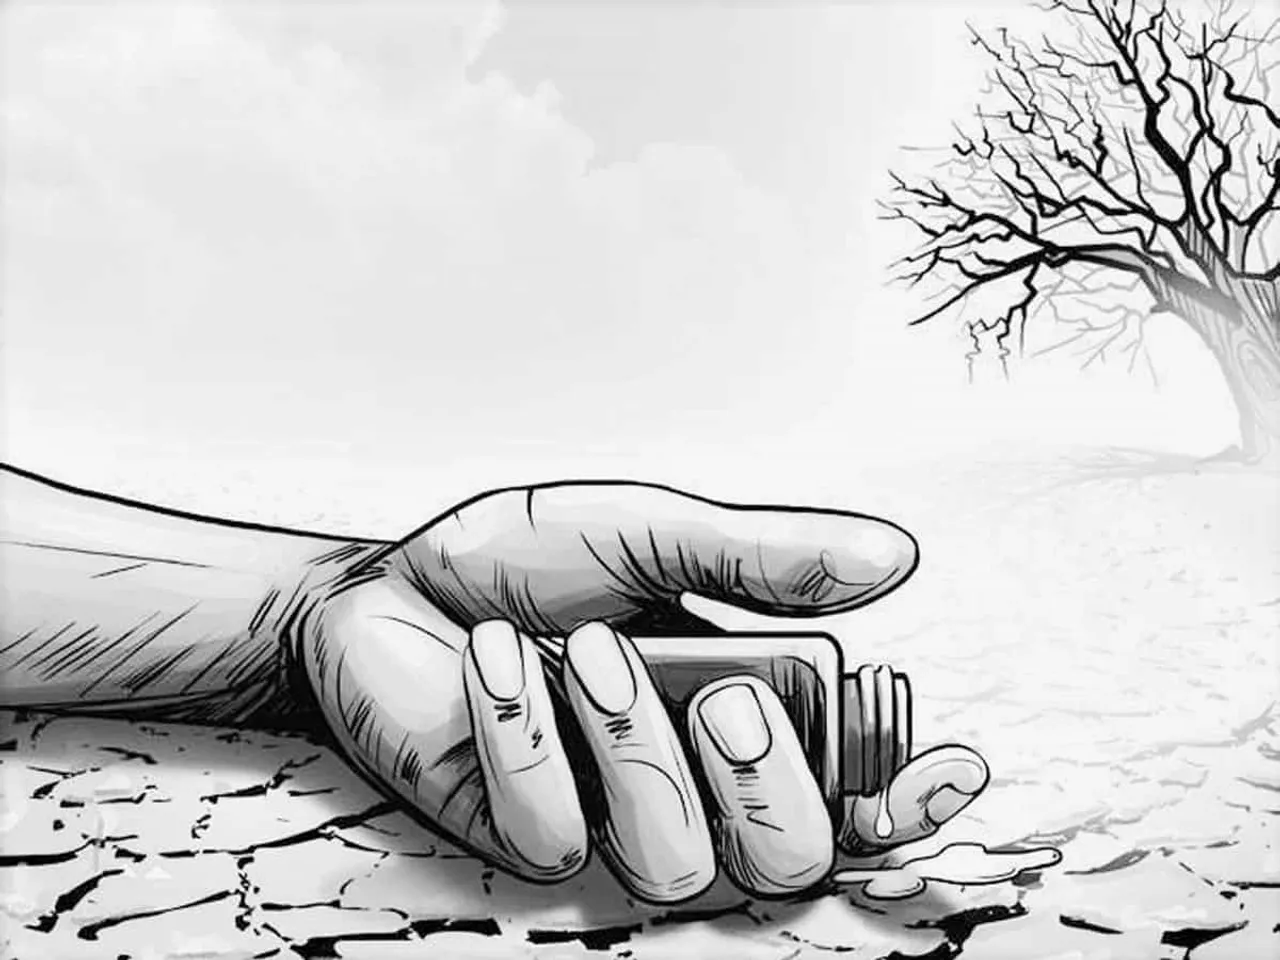 Five farmer suicides reported in Maharashtra's Yavatmal district over three days